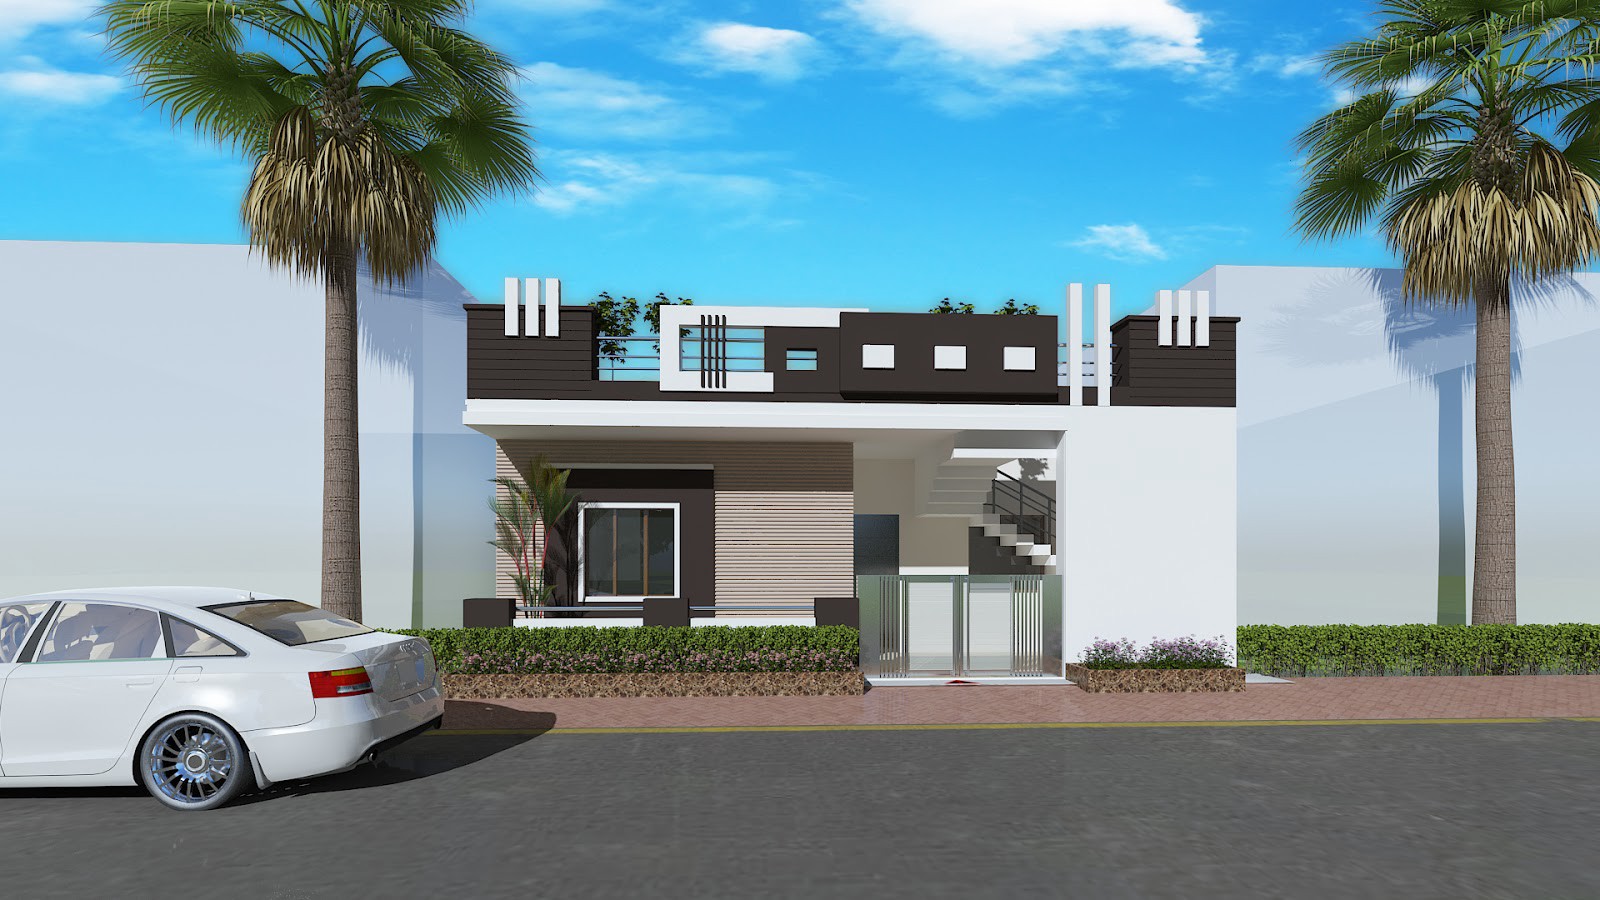 8 Images Home Front Elevation Design Simple Of India And View - Alqu Blog